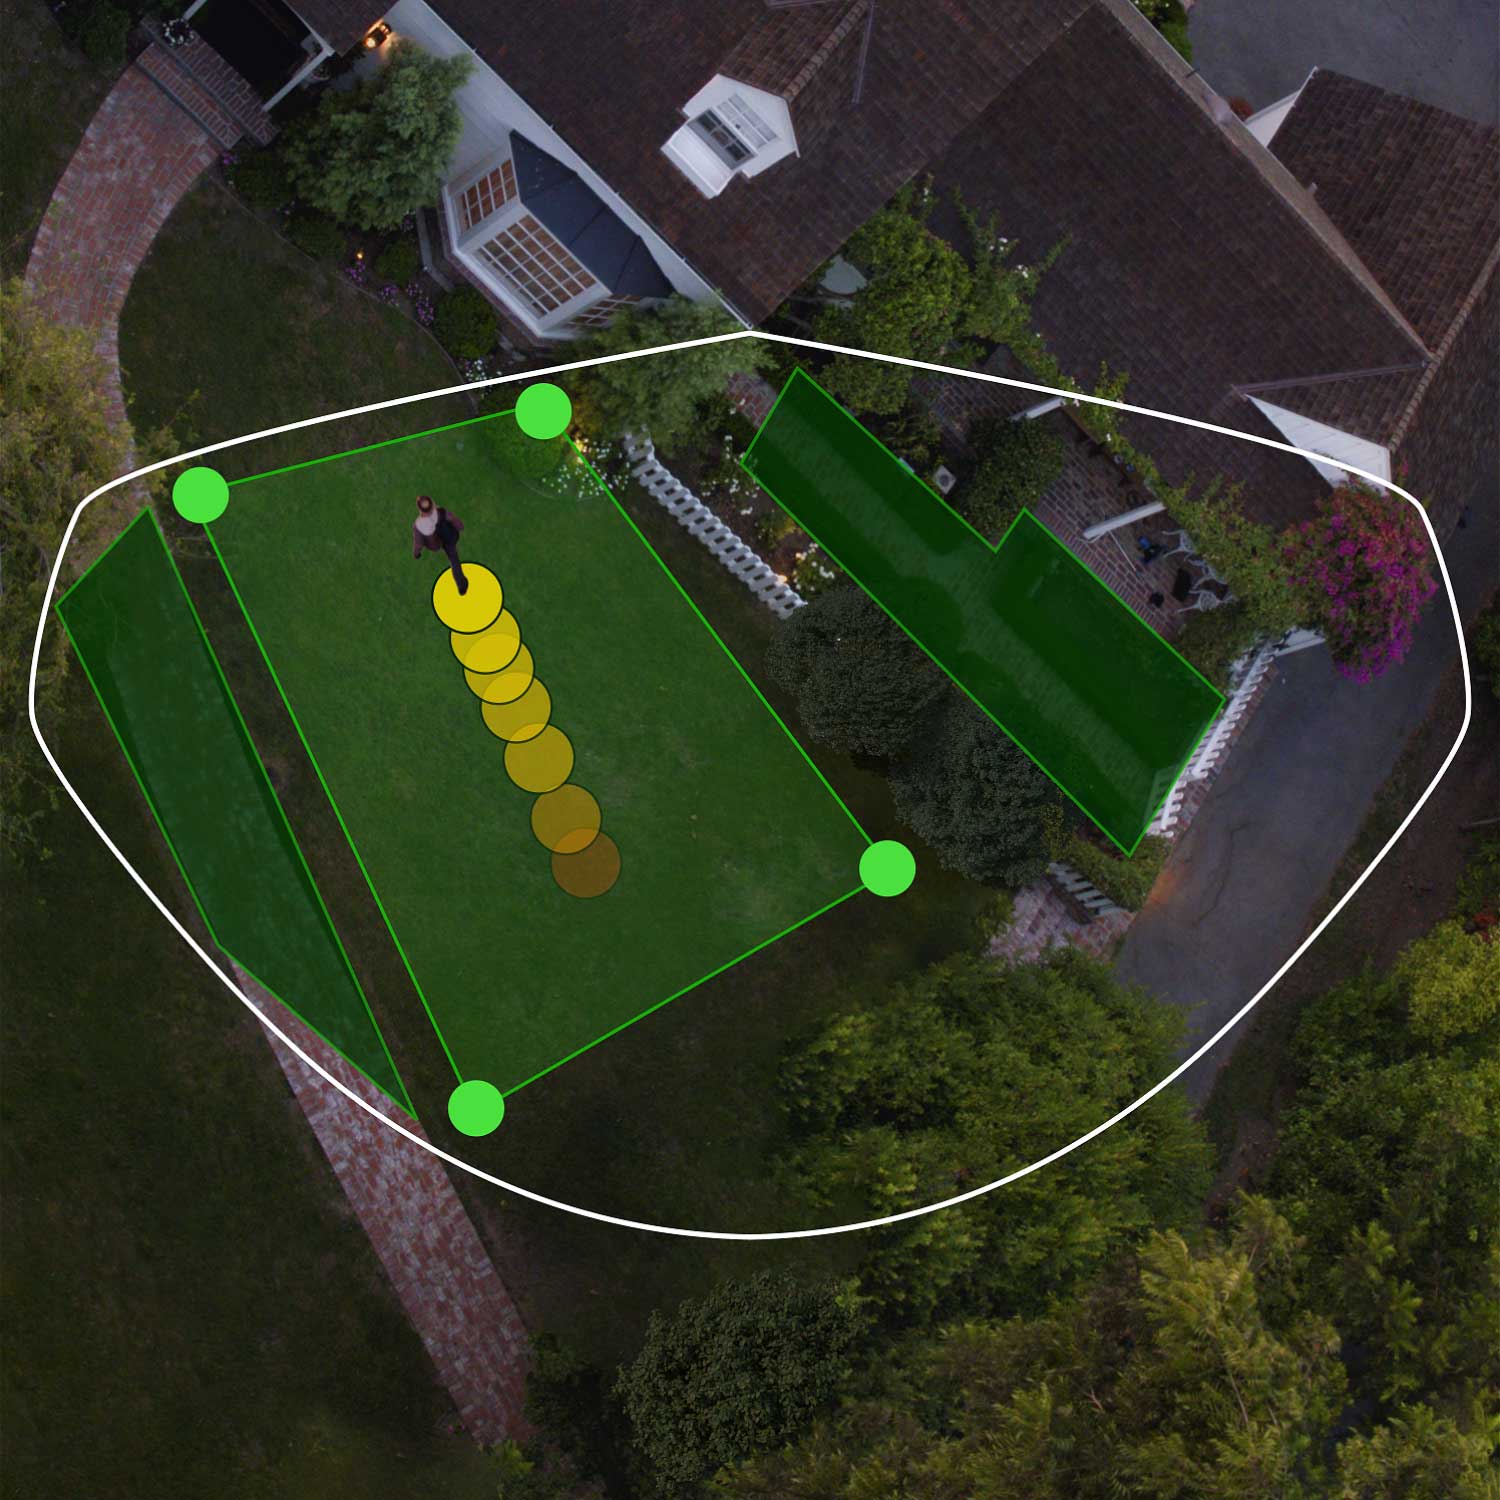 Spotlight Cam Pro (Battery) - Aerial view of front of house showing bird's eye view zones in green. Person walks toward front door, their path indicated by yellow dots.